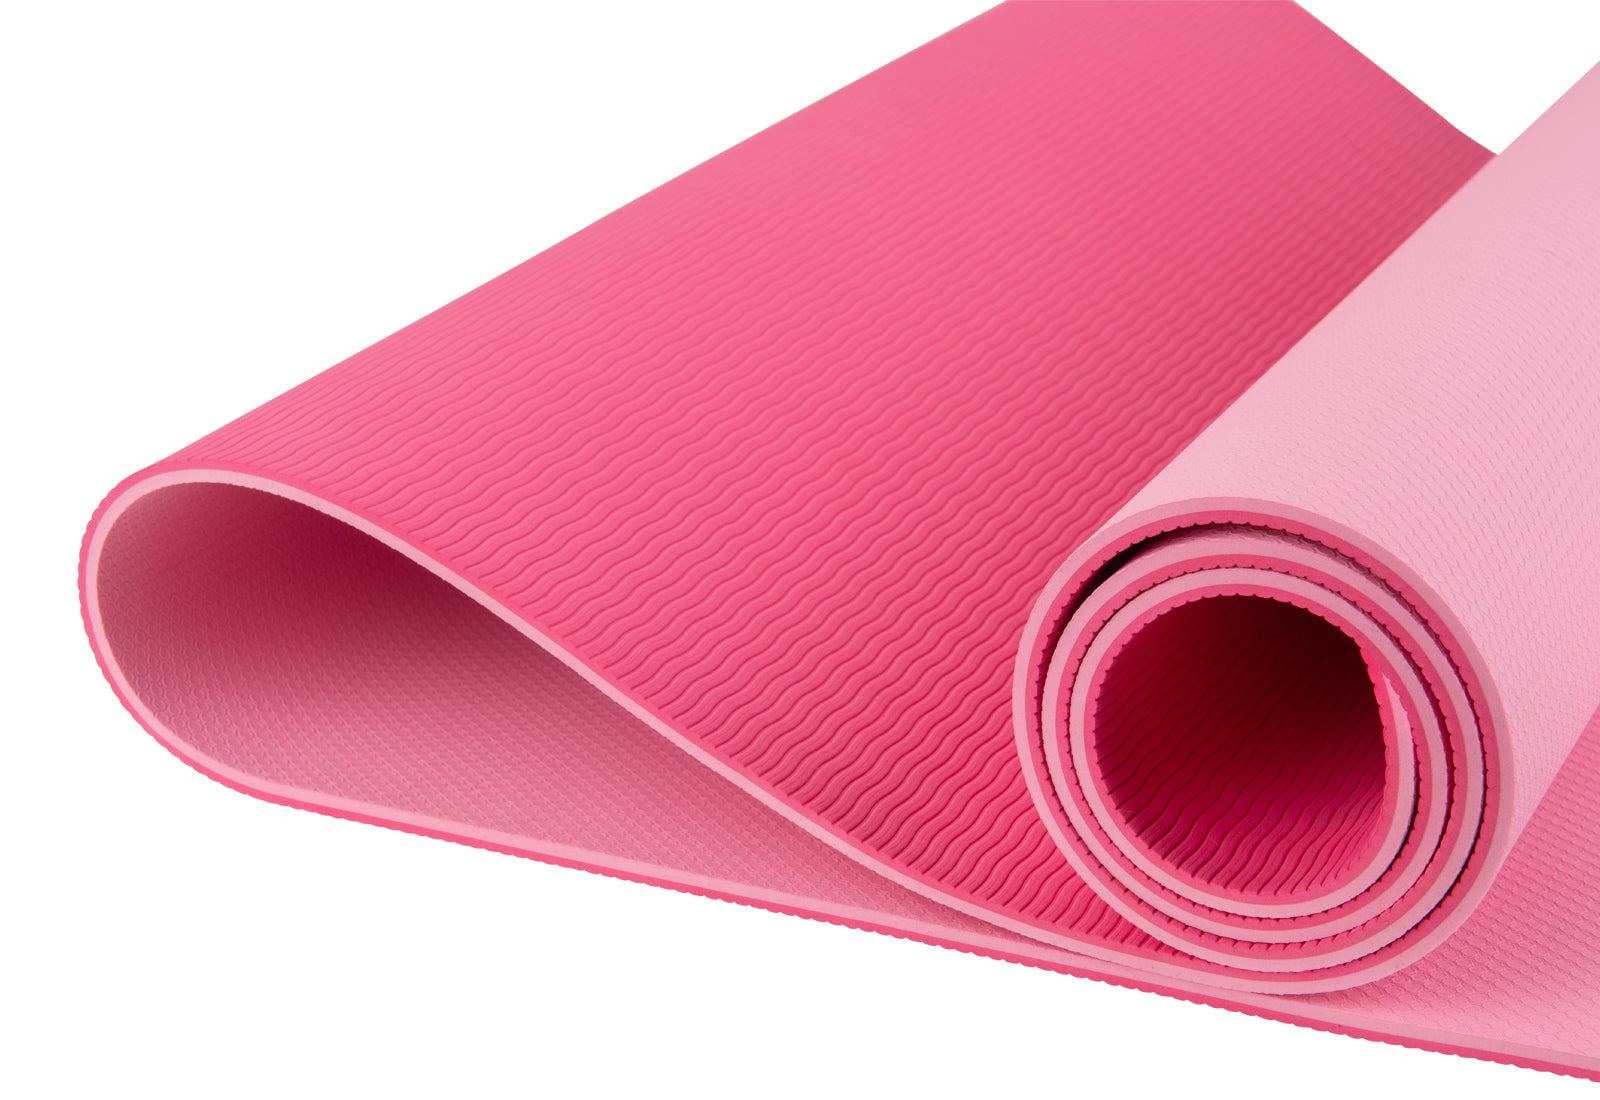 Spill - Blue, Olive Green, Pink and Cream Yoga Mat